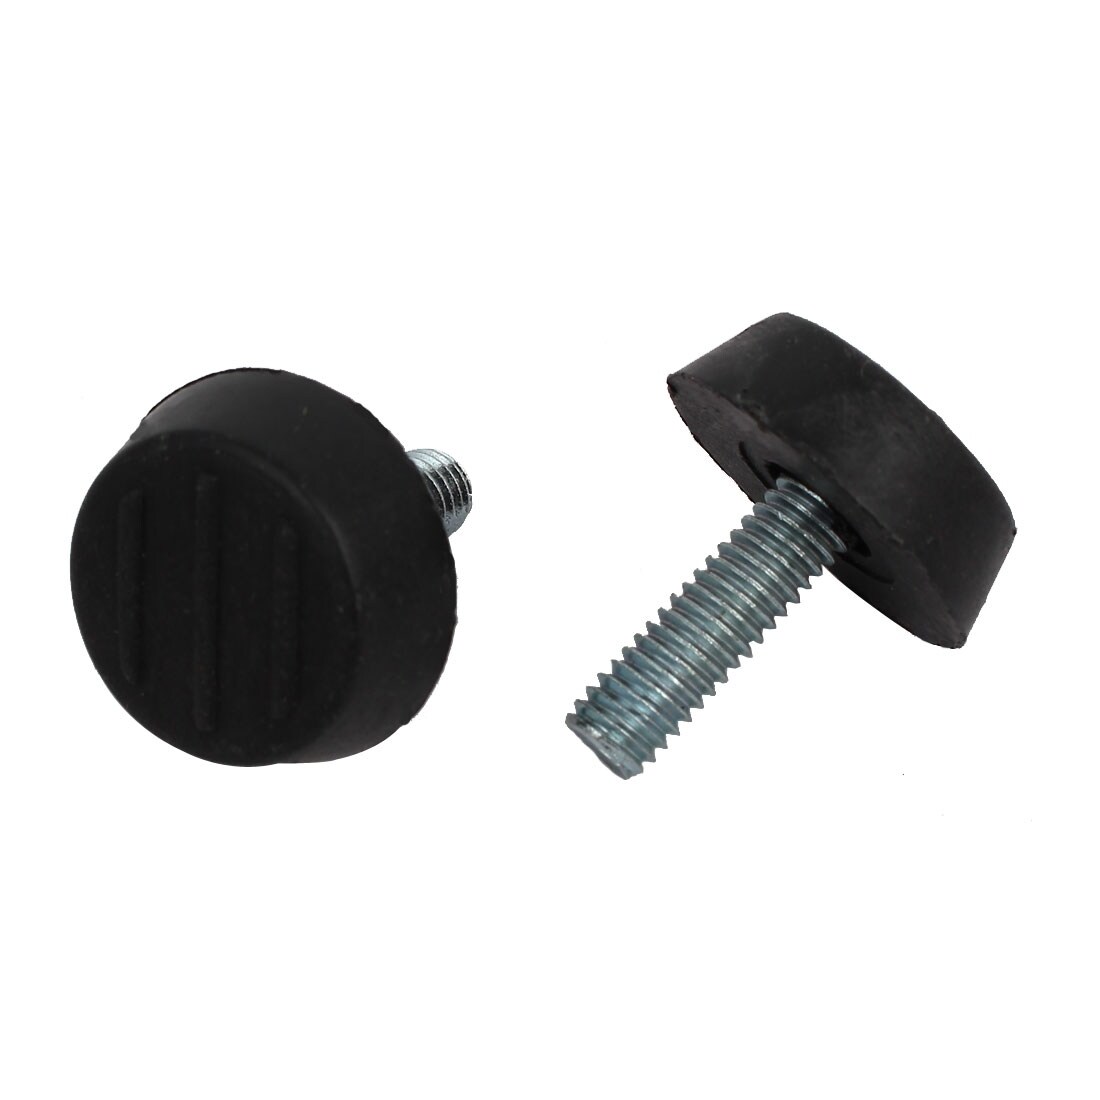 Base Male Threaded Furniture Chair Leveling Foot Glide 6 x 12mm 25pcs -  Black,Silver Tone - Bed Bath & Beyond - 33903976